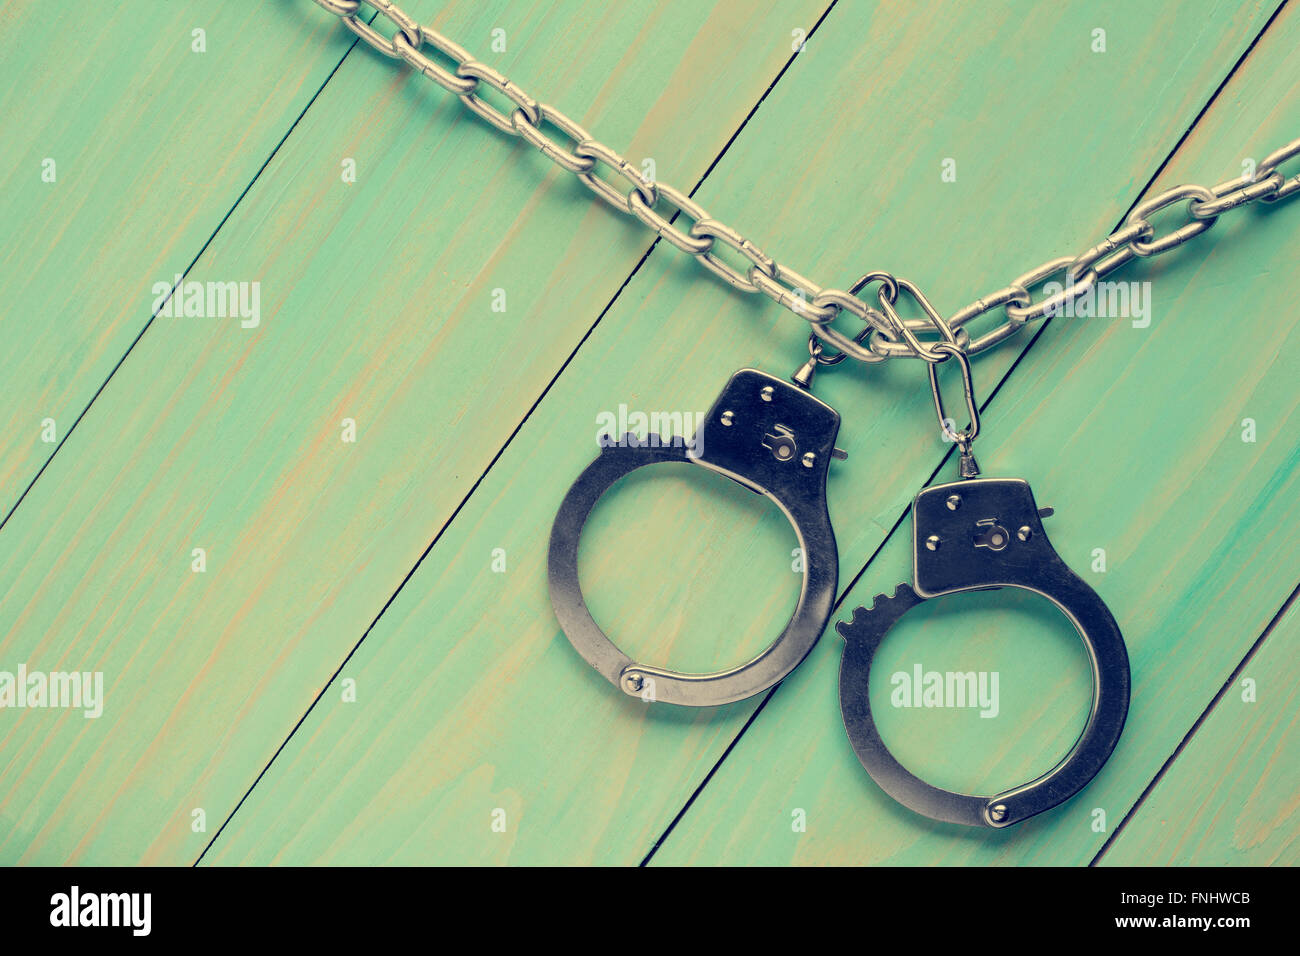 Handcuffs hanging on the chain against wooden background.Filtered image. Stock Photo